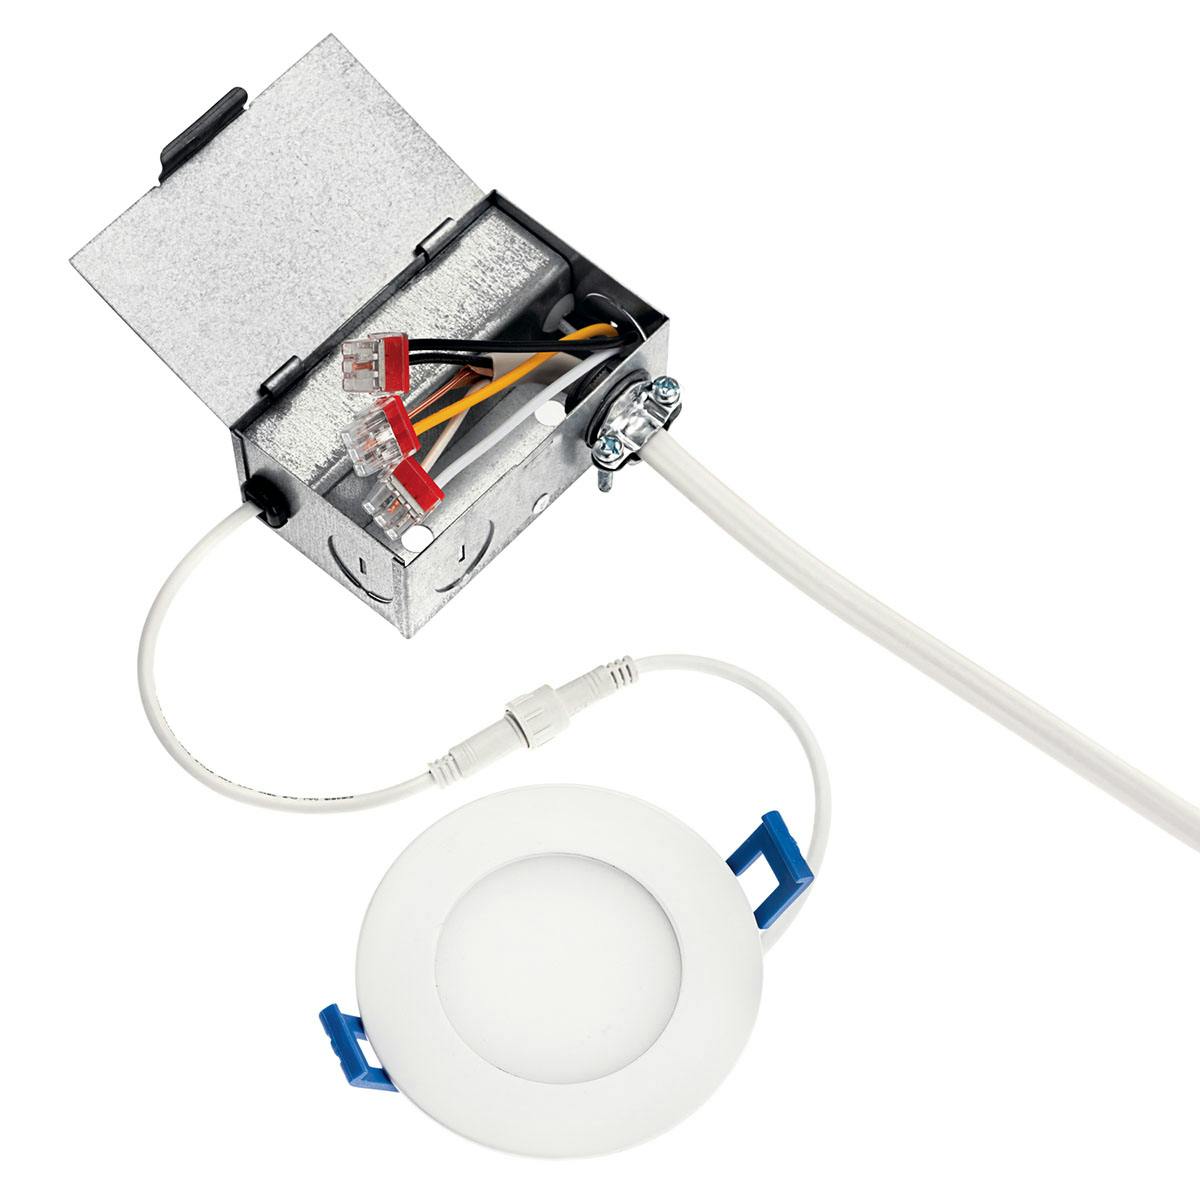 Wiring shown for the Direct-to-Ceiling 5" Round Slim 3000K LED Downlight White